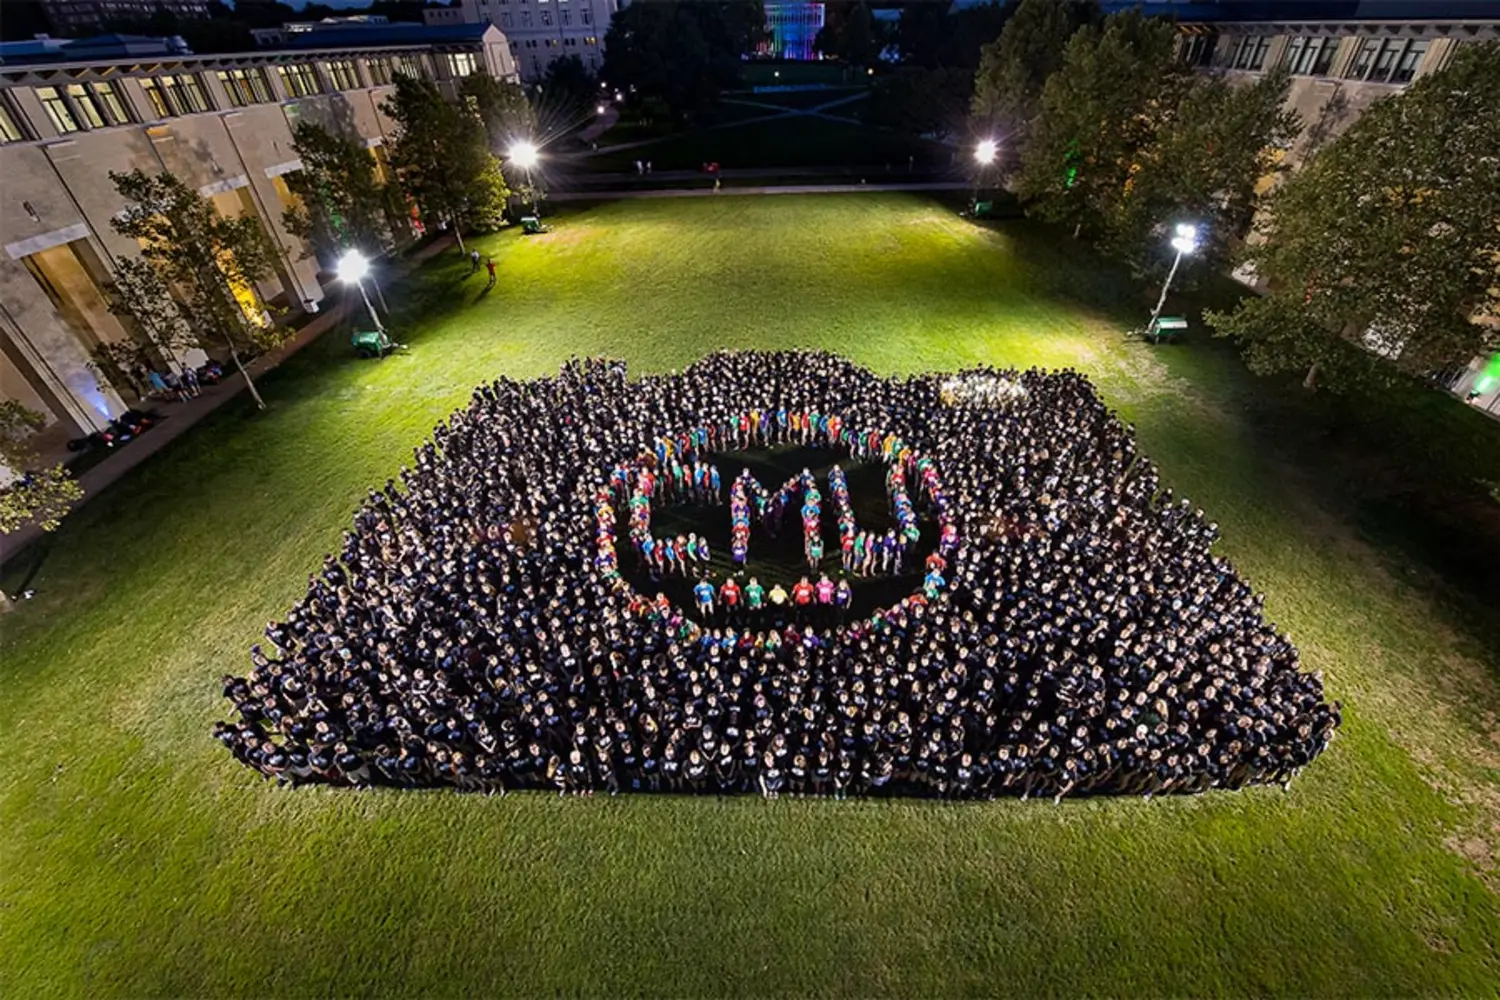 Students on the lawn, arranged to spell out CMU.